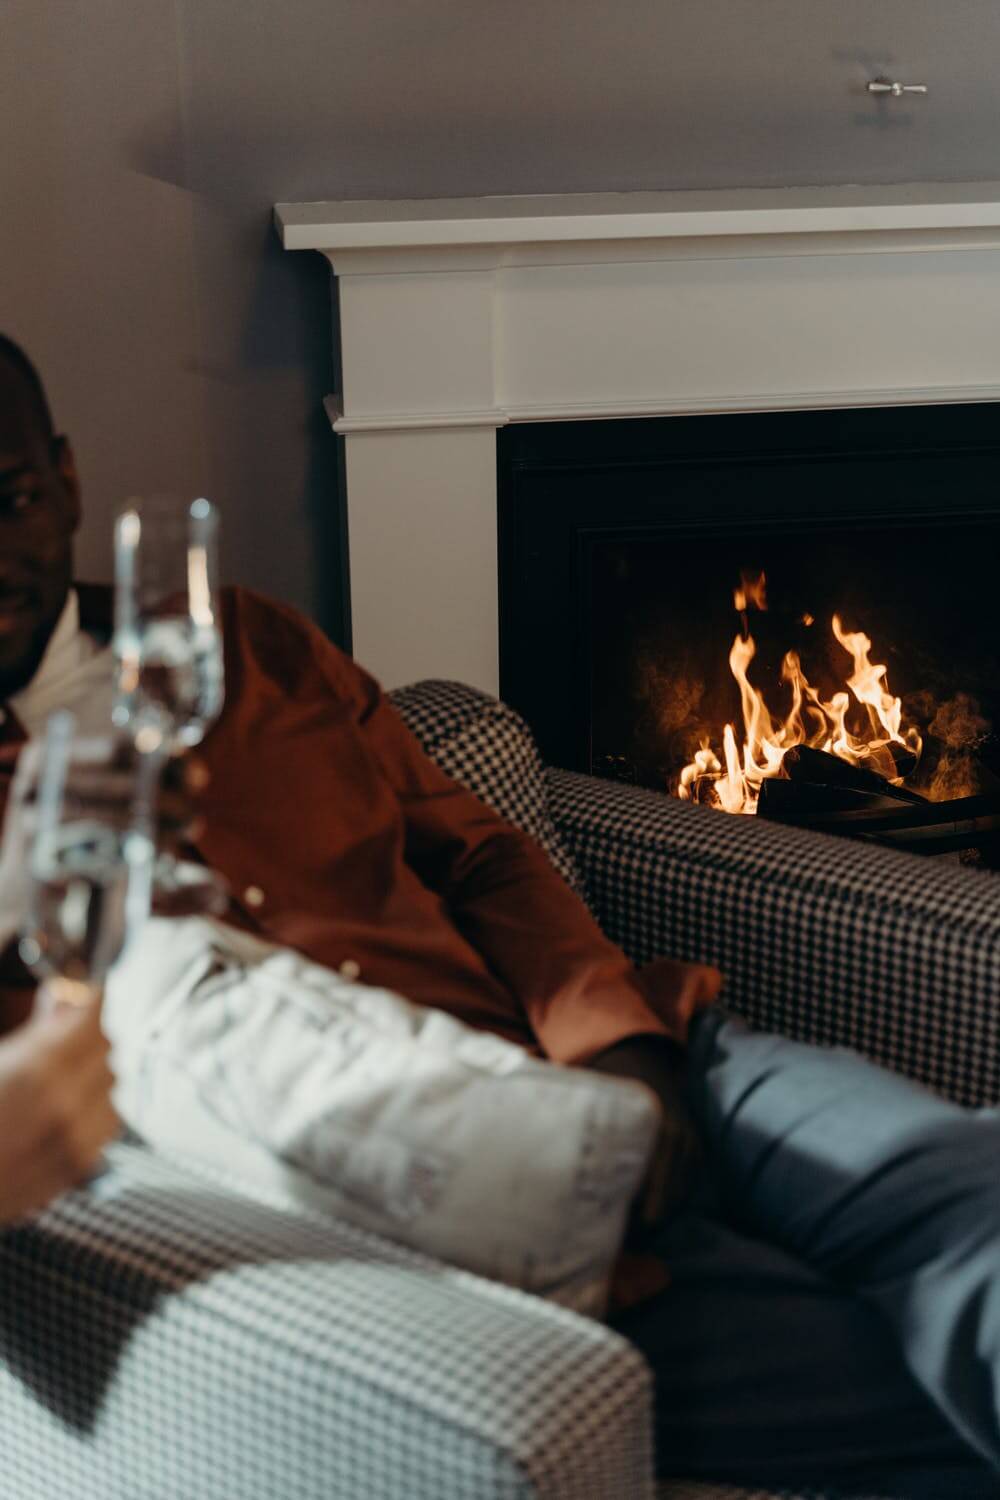 One person visible holding a champagne flute against another in front of bright fireplace